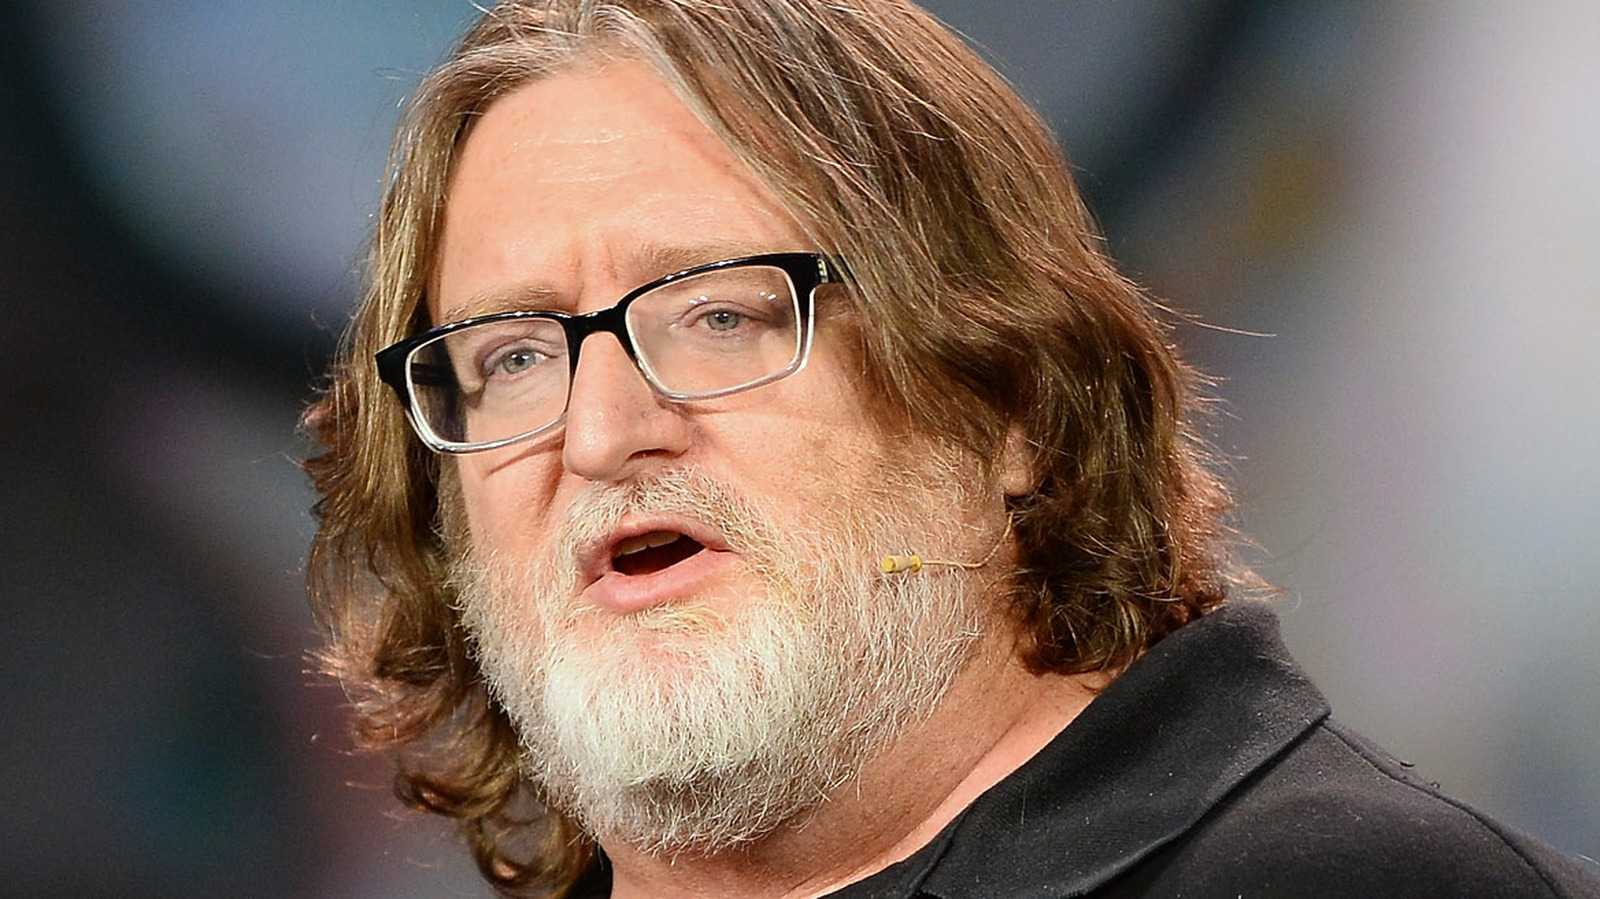 Gabe Newell, Valve's president and extremely meme-able person